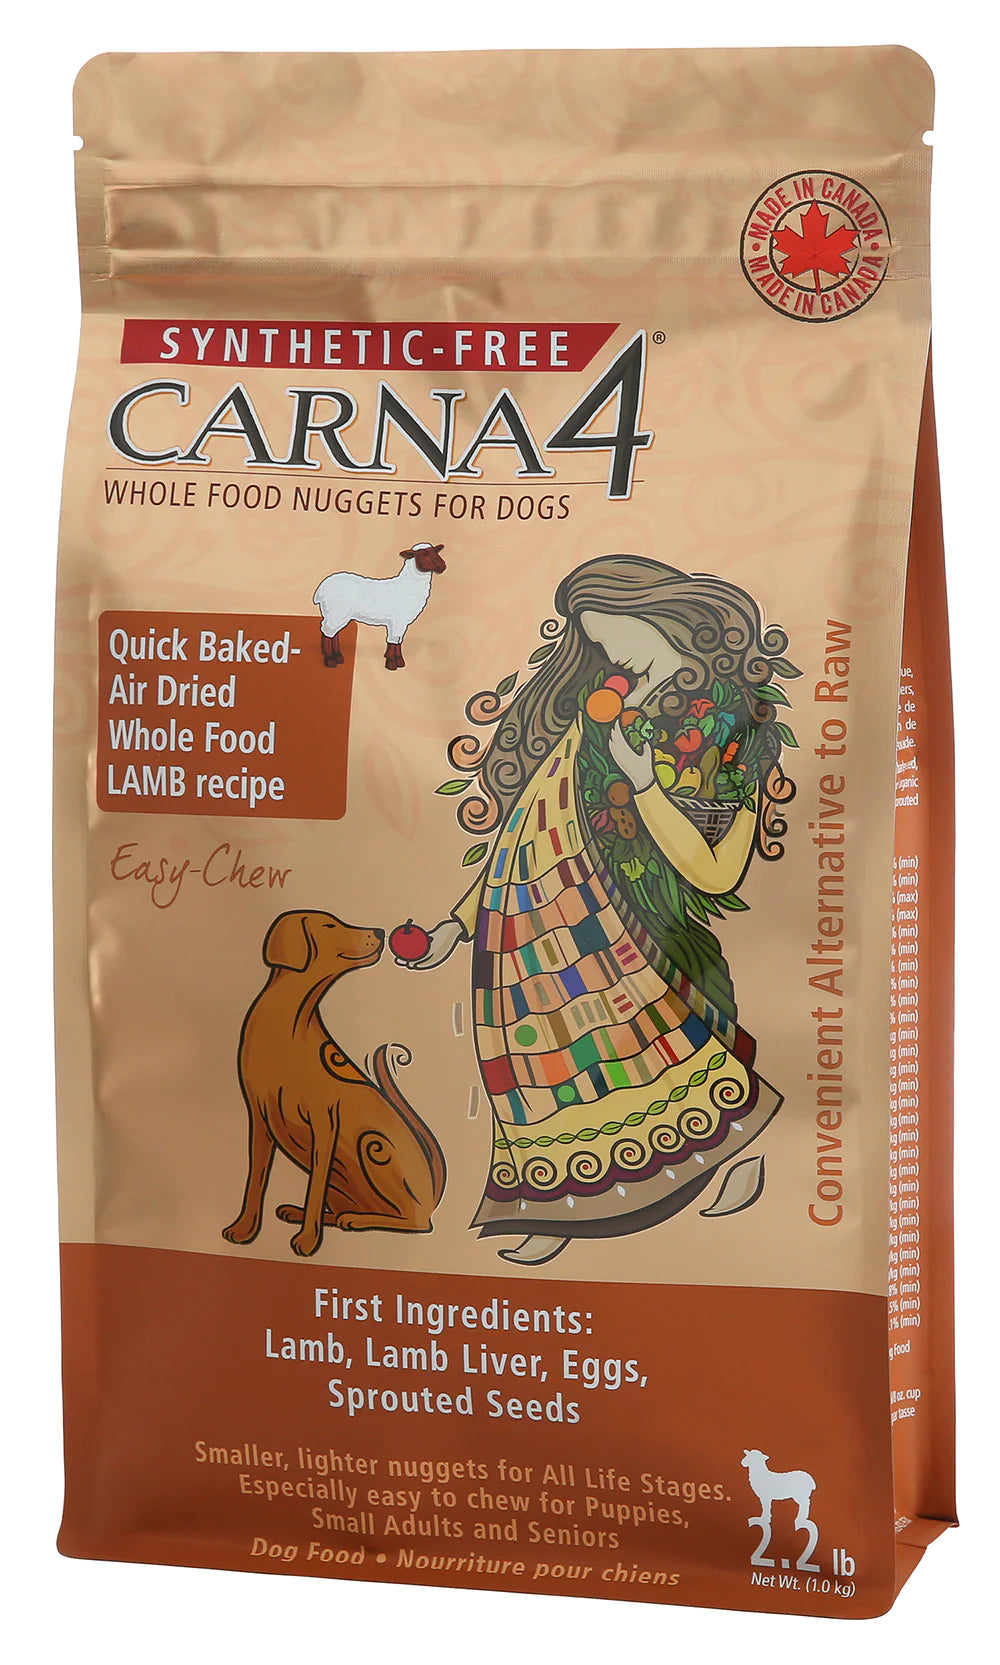 Carna4 - Quick Baked - Air Dried Whole Food Nuggets - Lamb